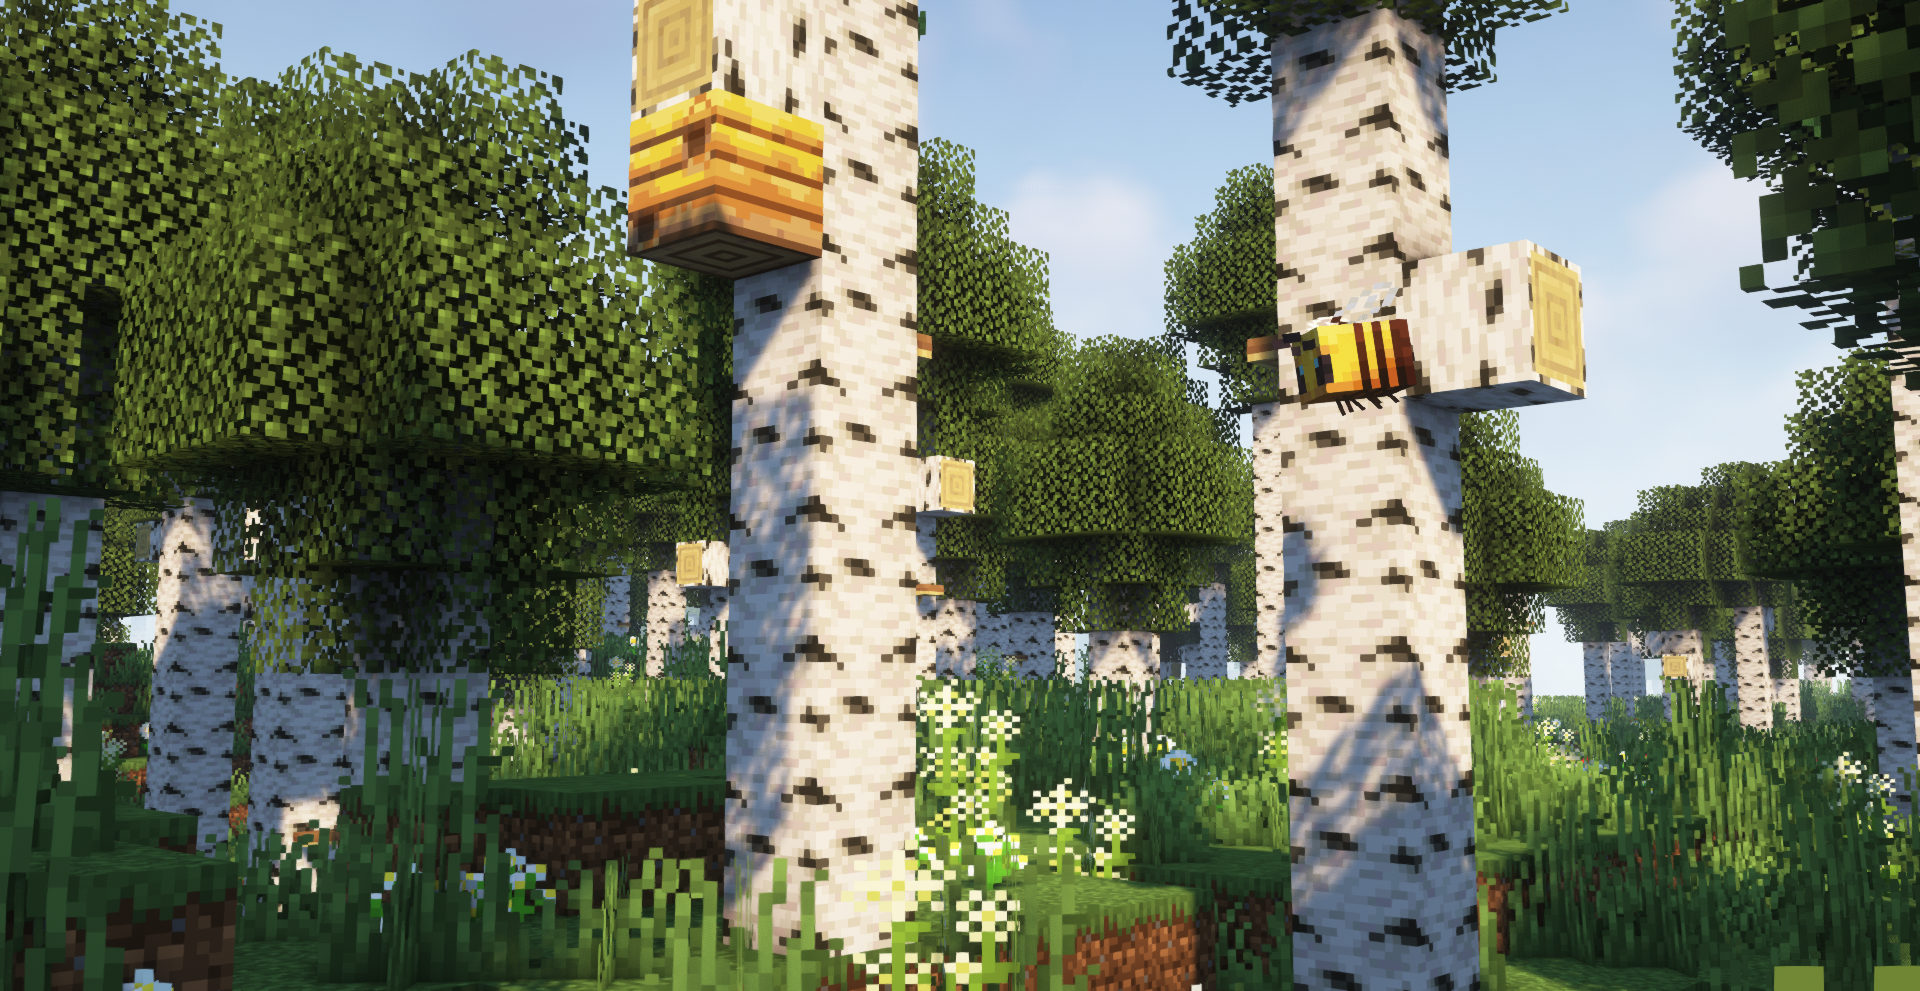 Bees adaptation with new tall birch trees